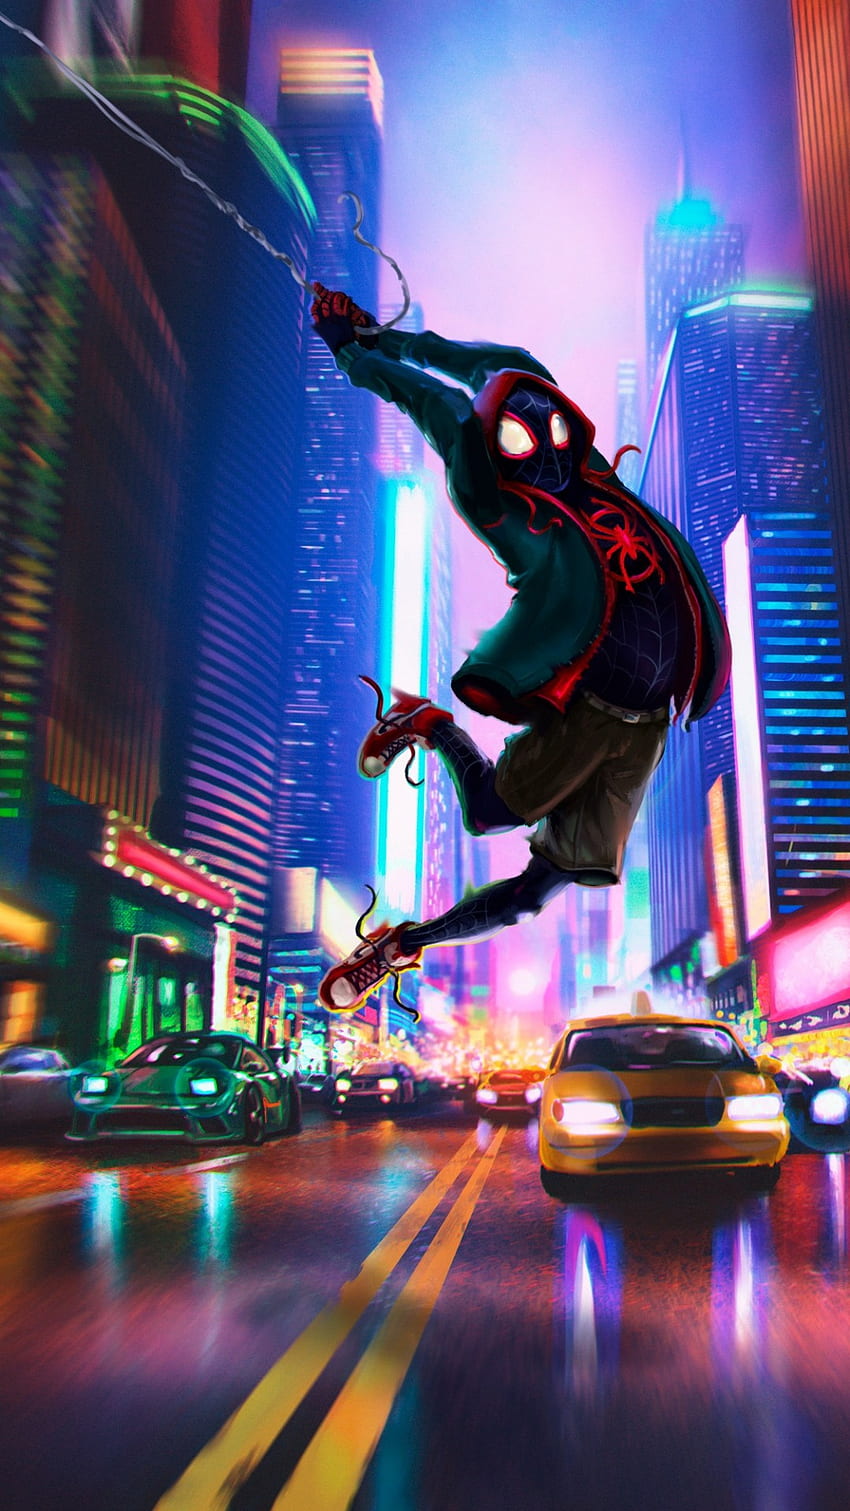 Spider Man: Into The Spider Verse, New York, Urban, Night, Vehicles, Animation, Artwork For IPhone 8, IPhone 7 Plus, IPhone 6+, Sony Xperia Z, HTC One, Spiderman Upside Down วอลล์เปเปอร์โทรศัพท์ HD